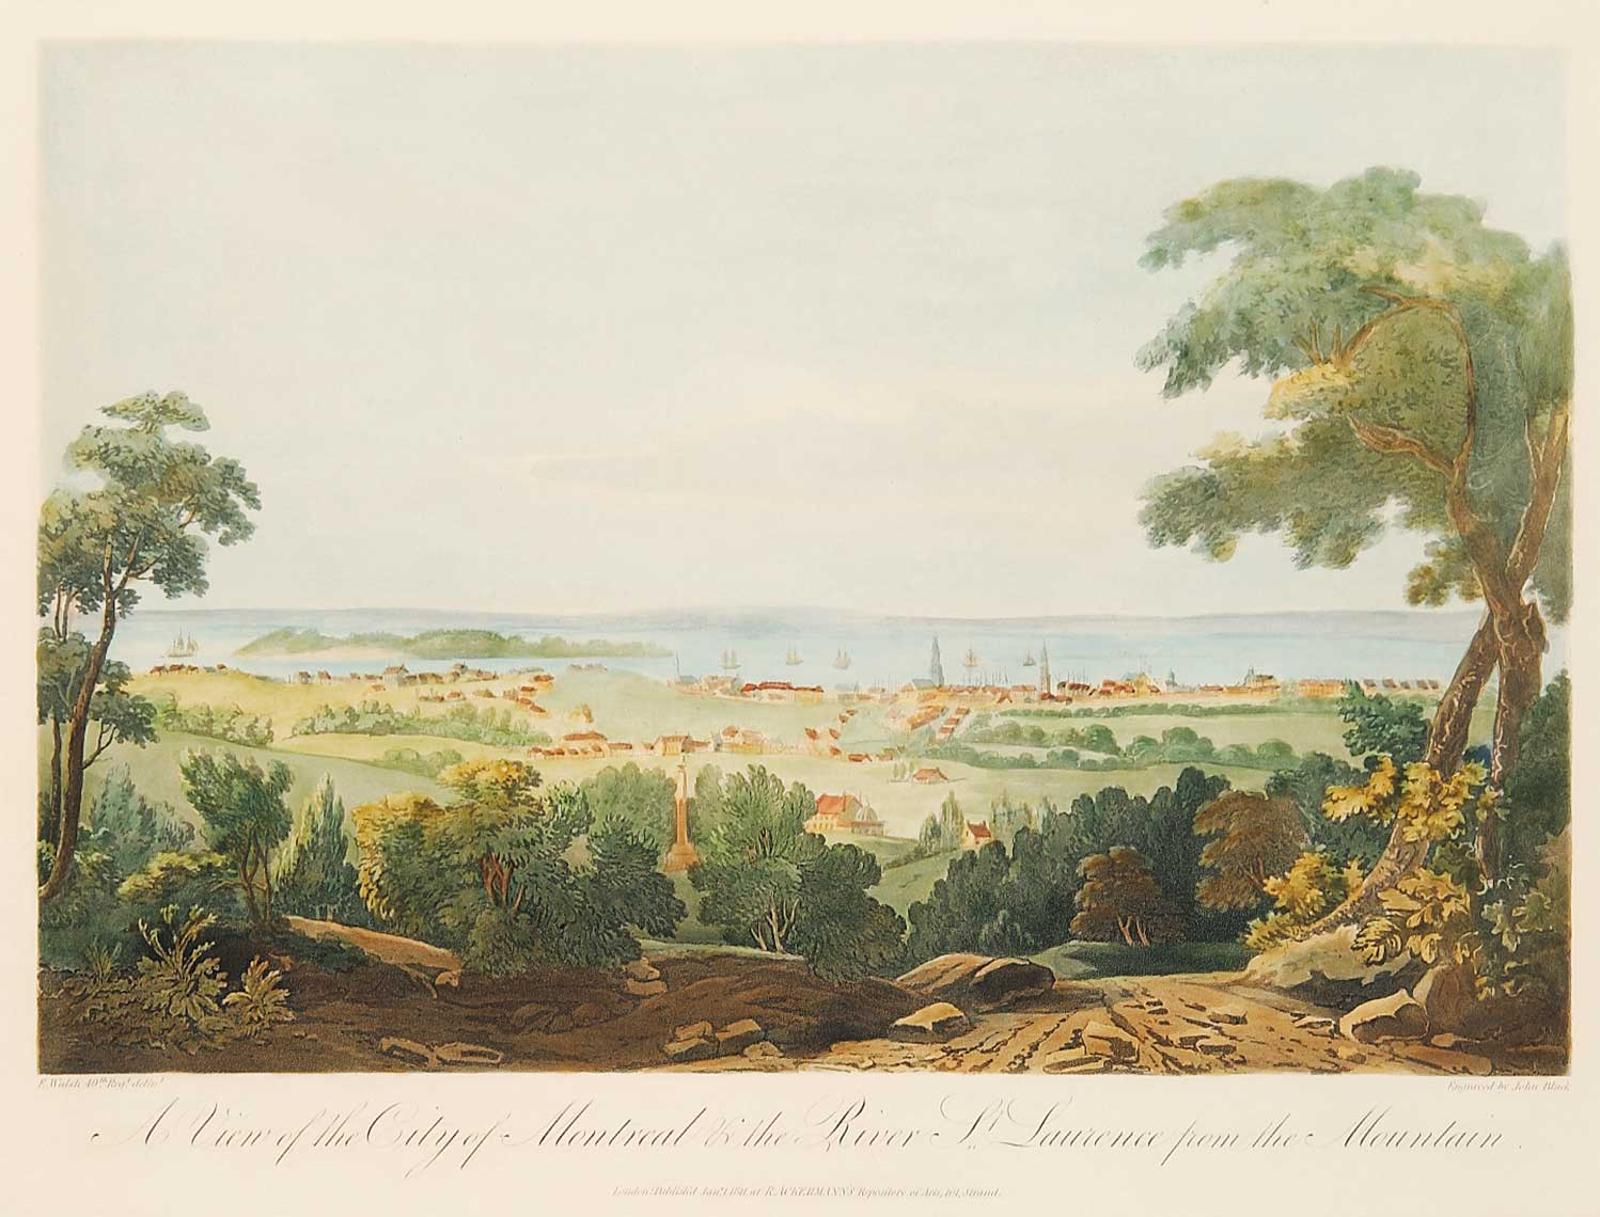 Edward Walsh - A View of the City of Montreal and the River St. Laurance from the Mountain